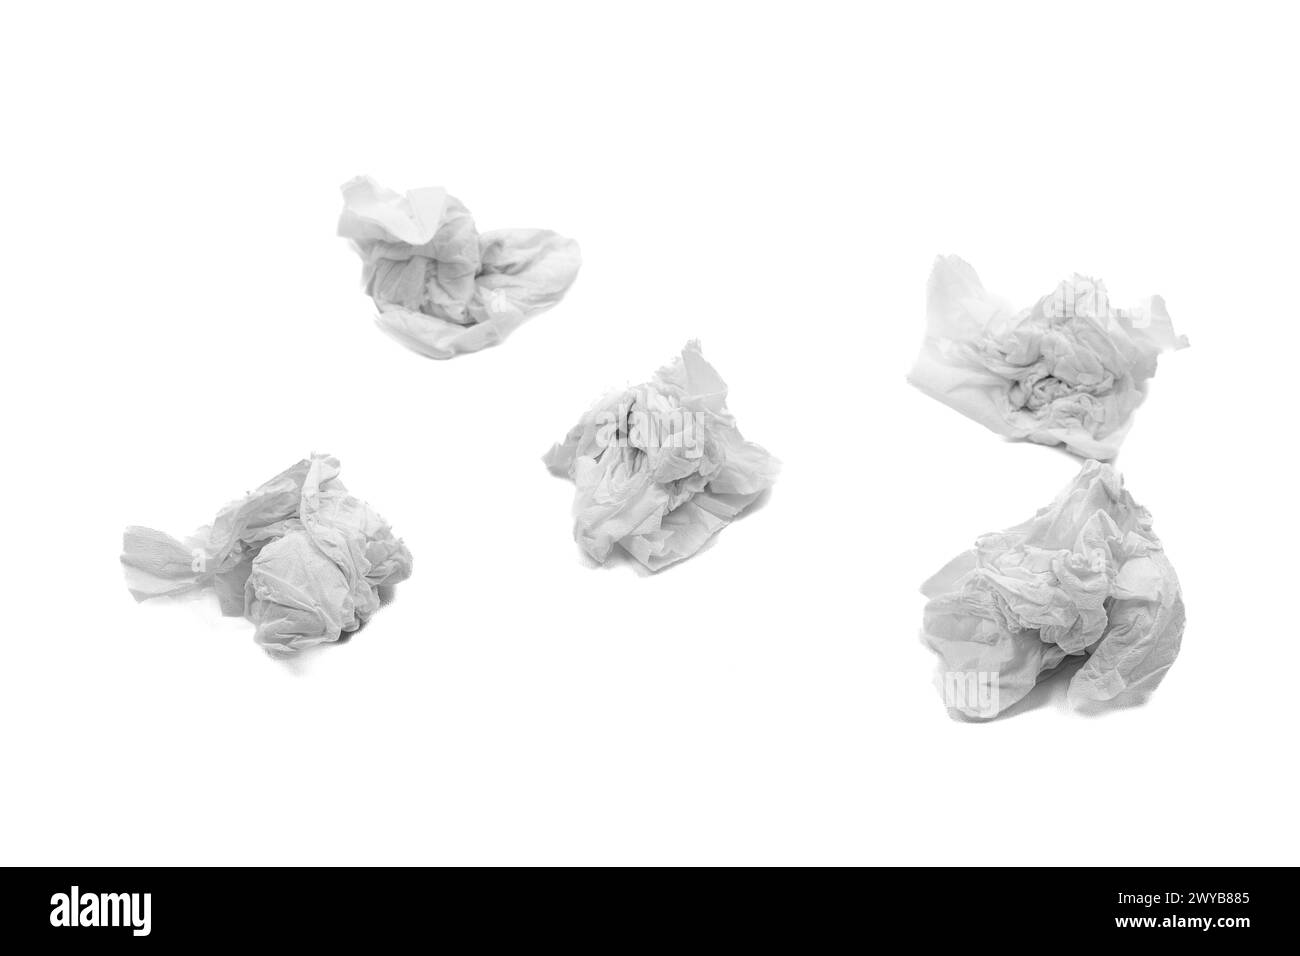 Set of crumpled tissue paper. Used screwed paper tissue isolated on white background. Personal hygiene Stock Photo